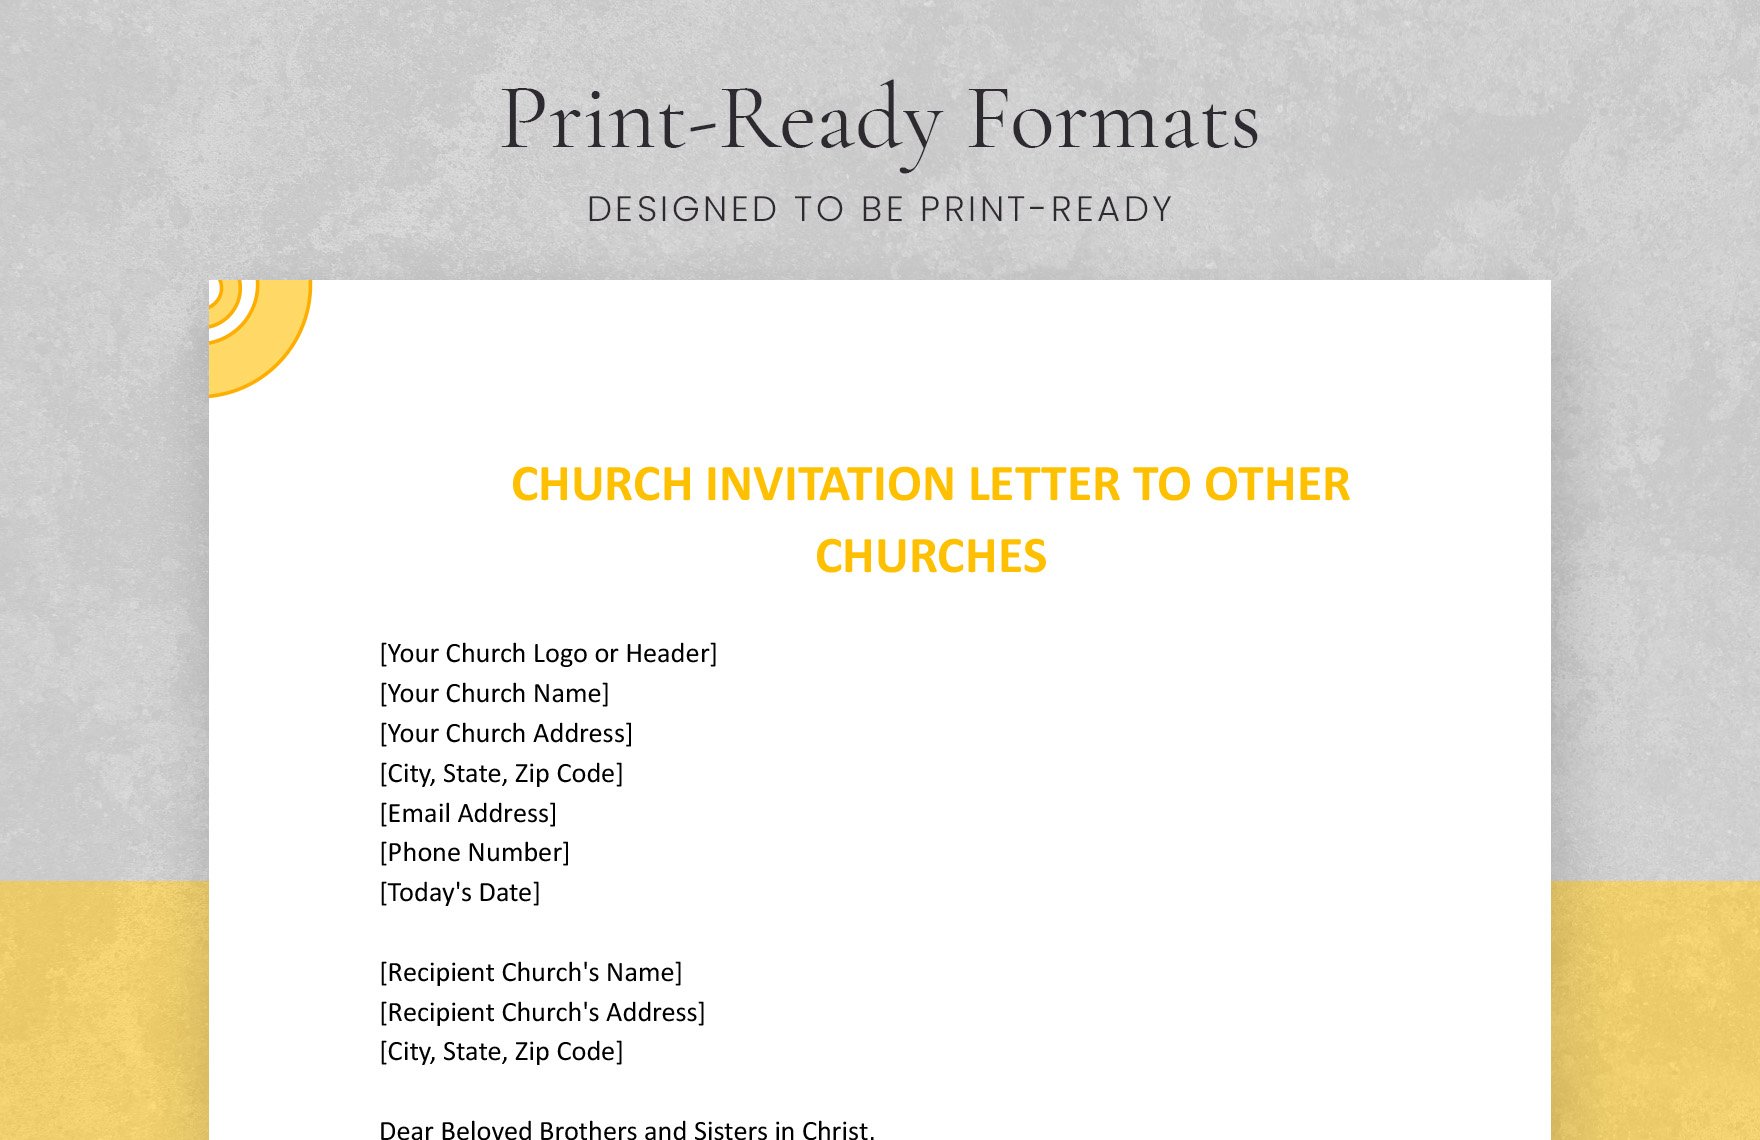 Church Invitation Letter To Other Churches